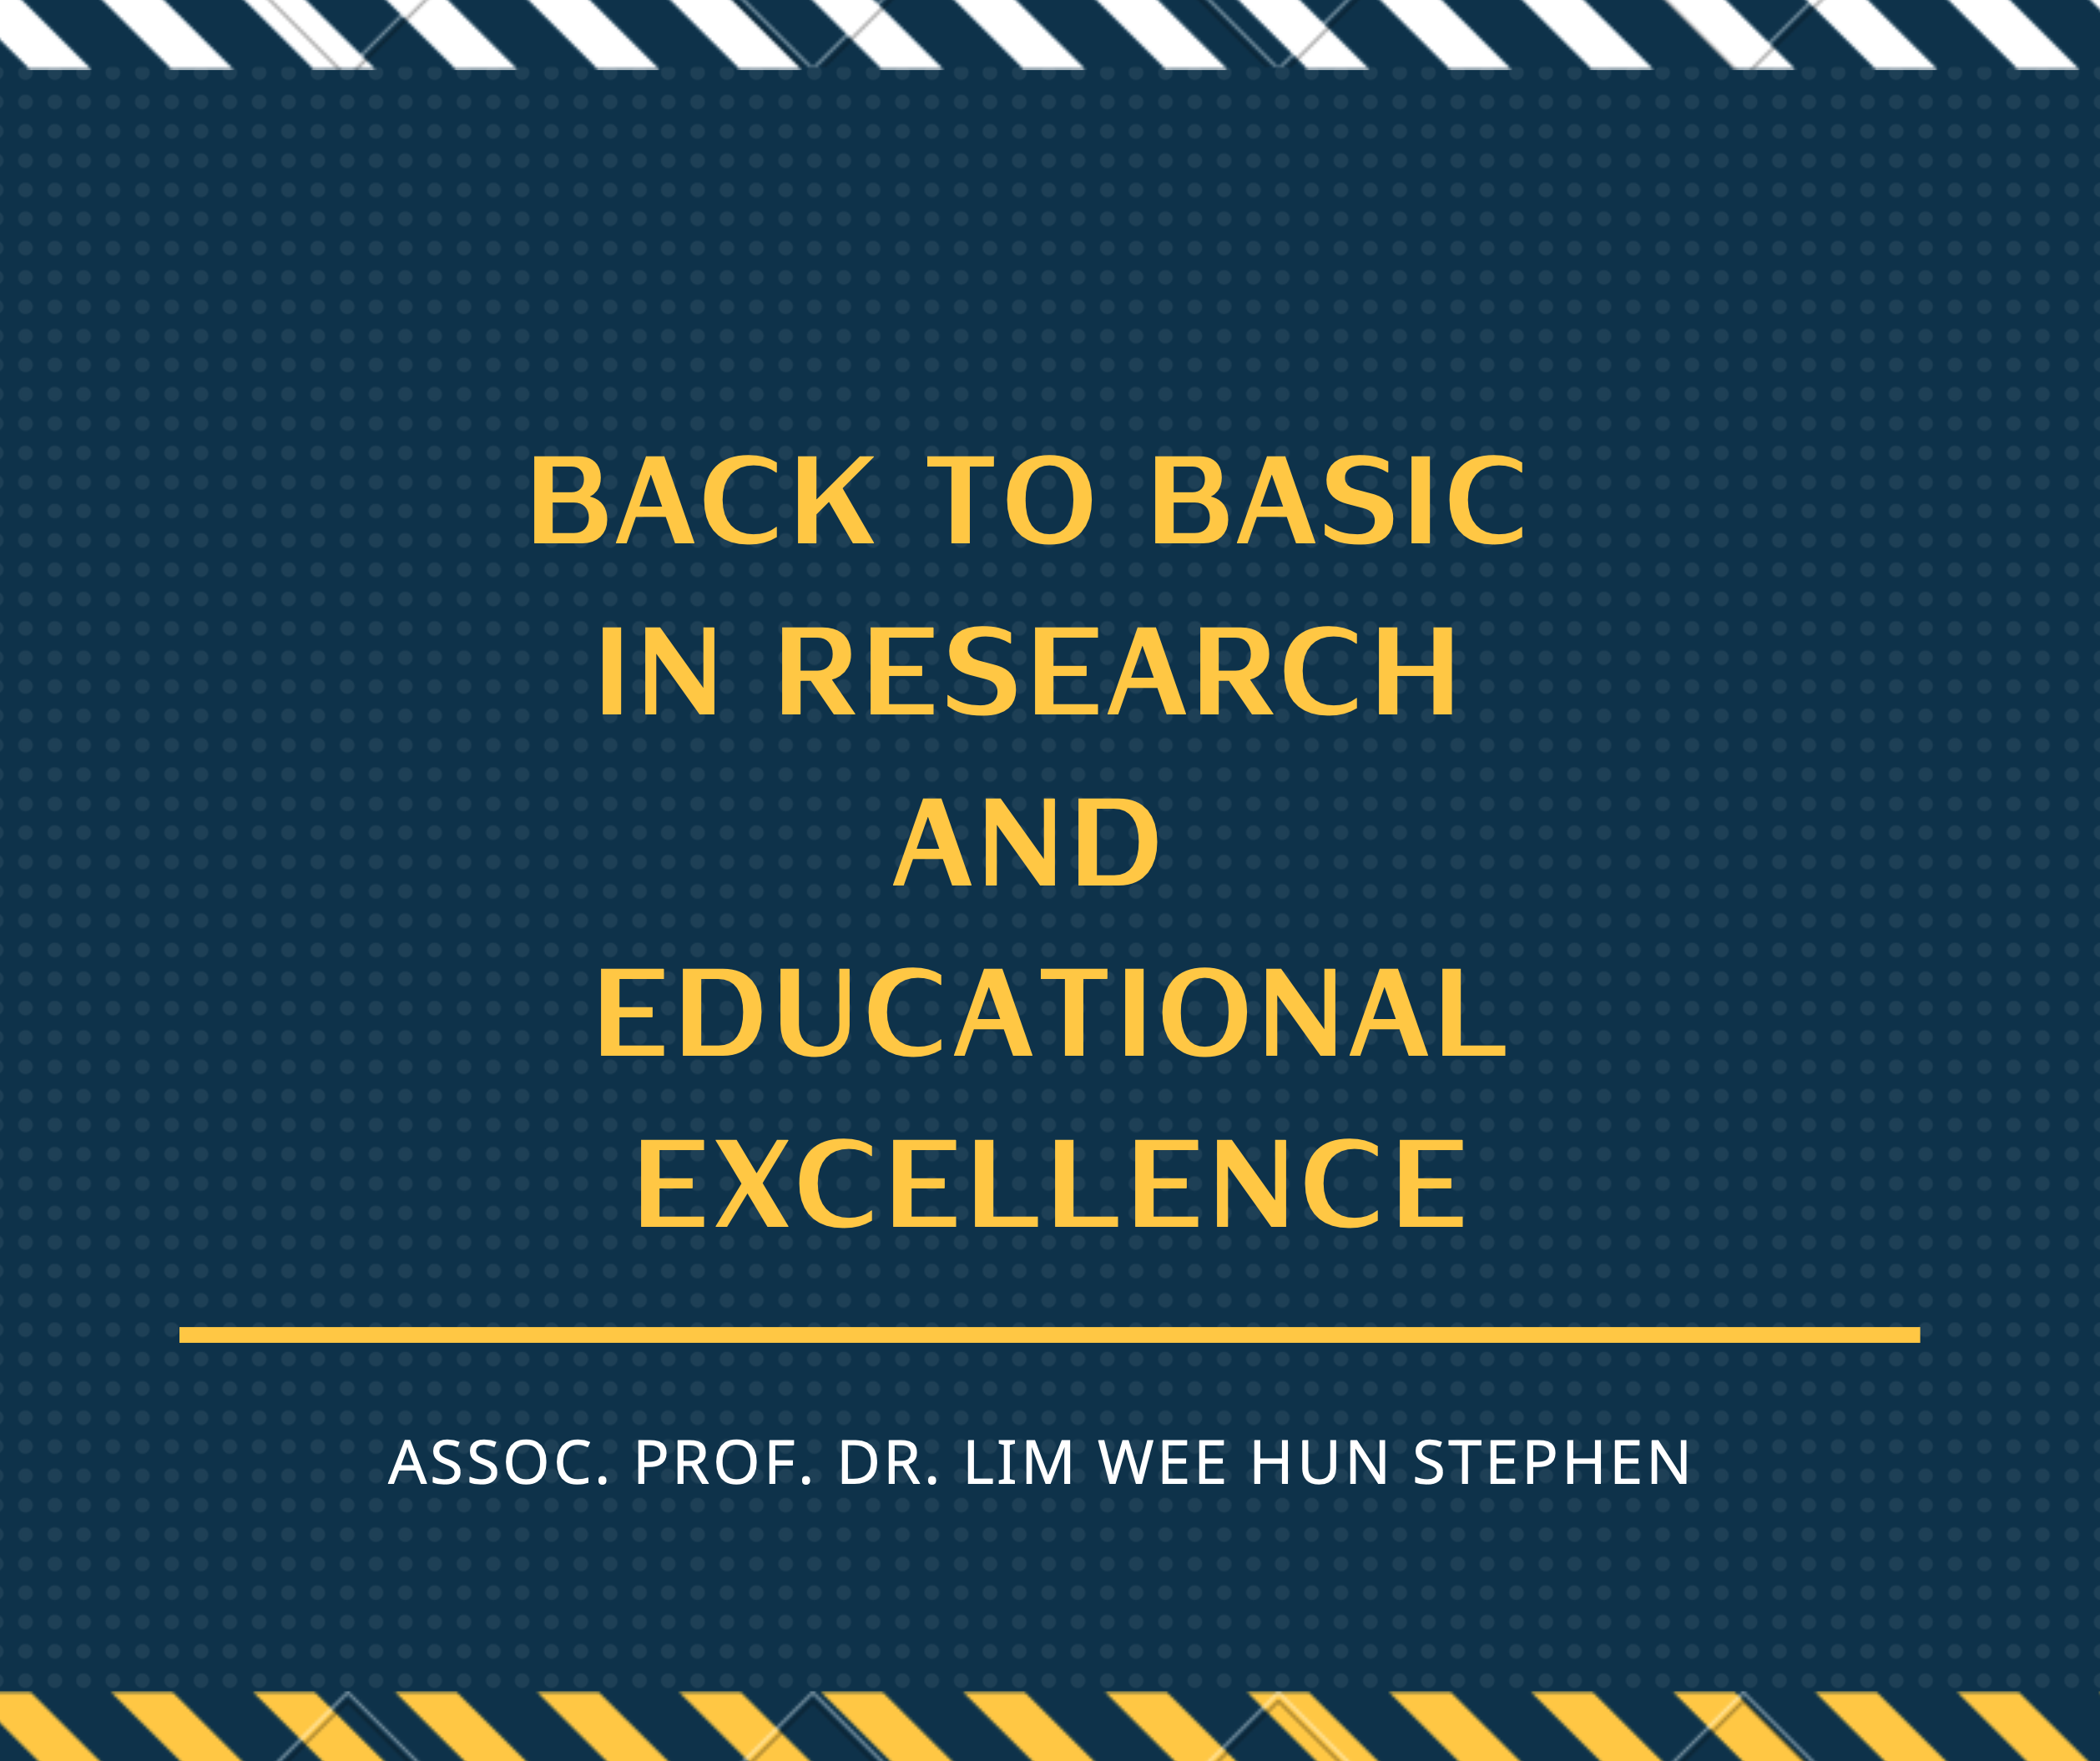 Workshop1 - Back to Basic in Research and Educational Excellence